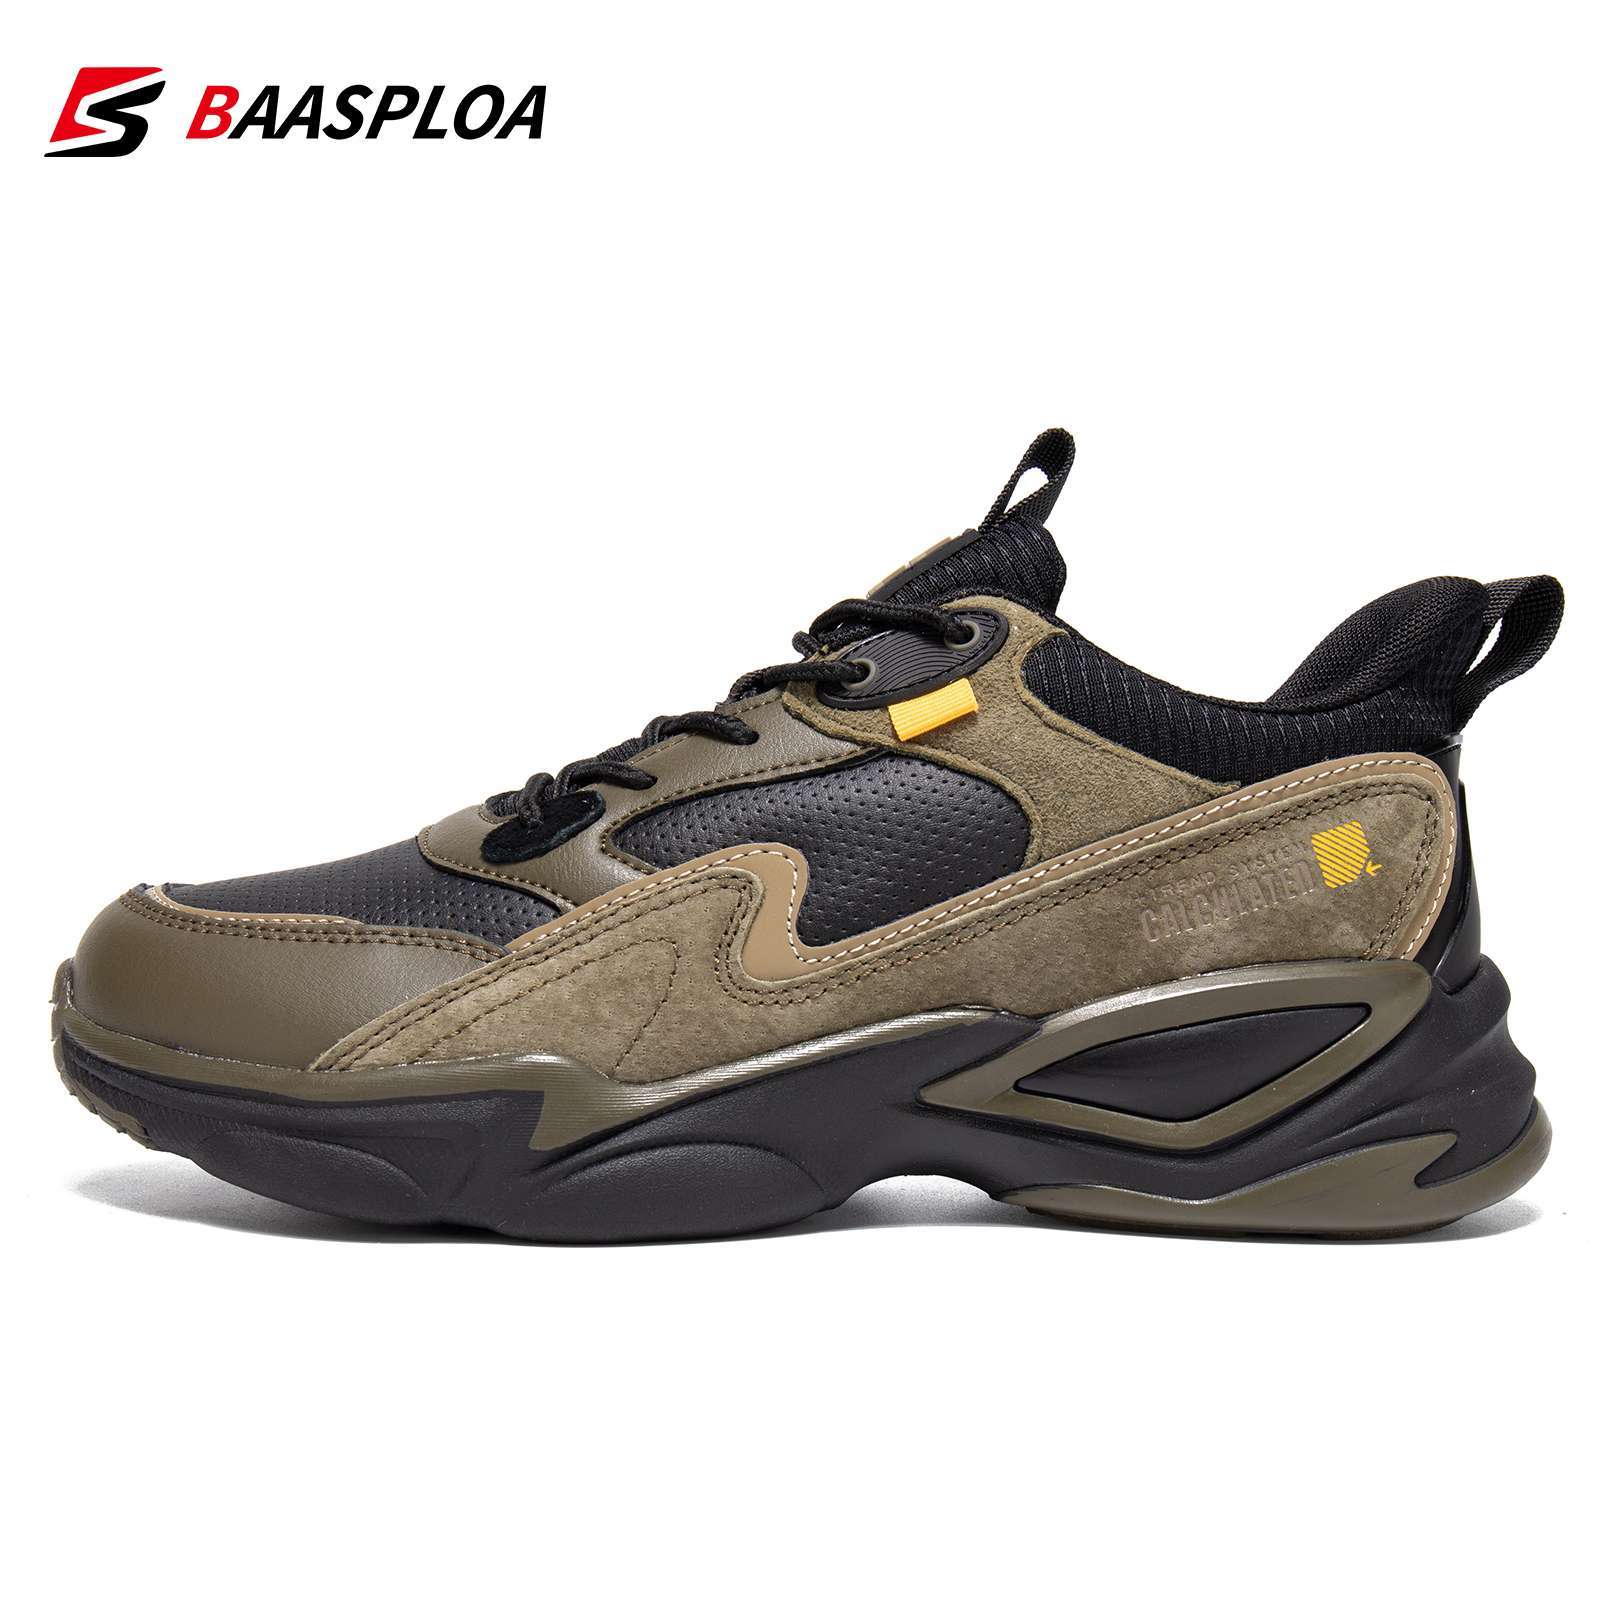 Baasploa 2022 New Men Lightweight Running Shoes Comfortable Casual Walking Shoes Non slip Male Leather Sneakers 2